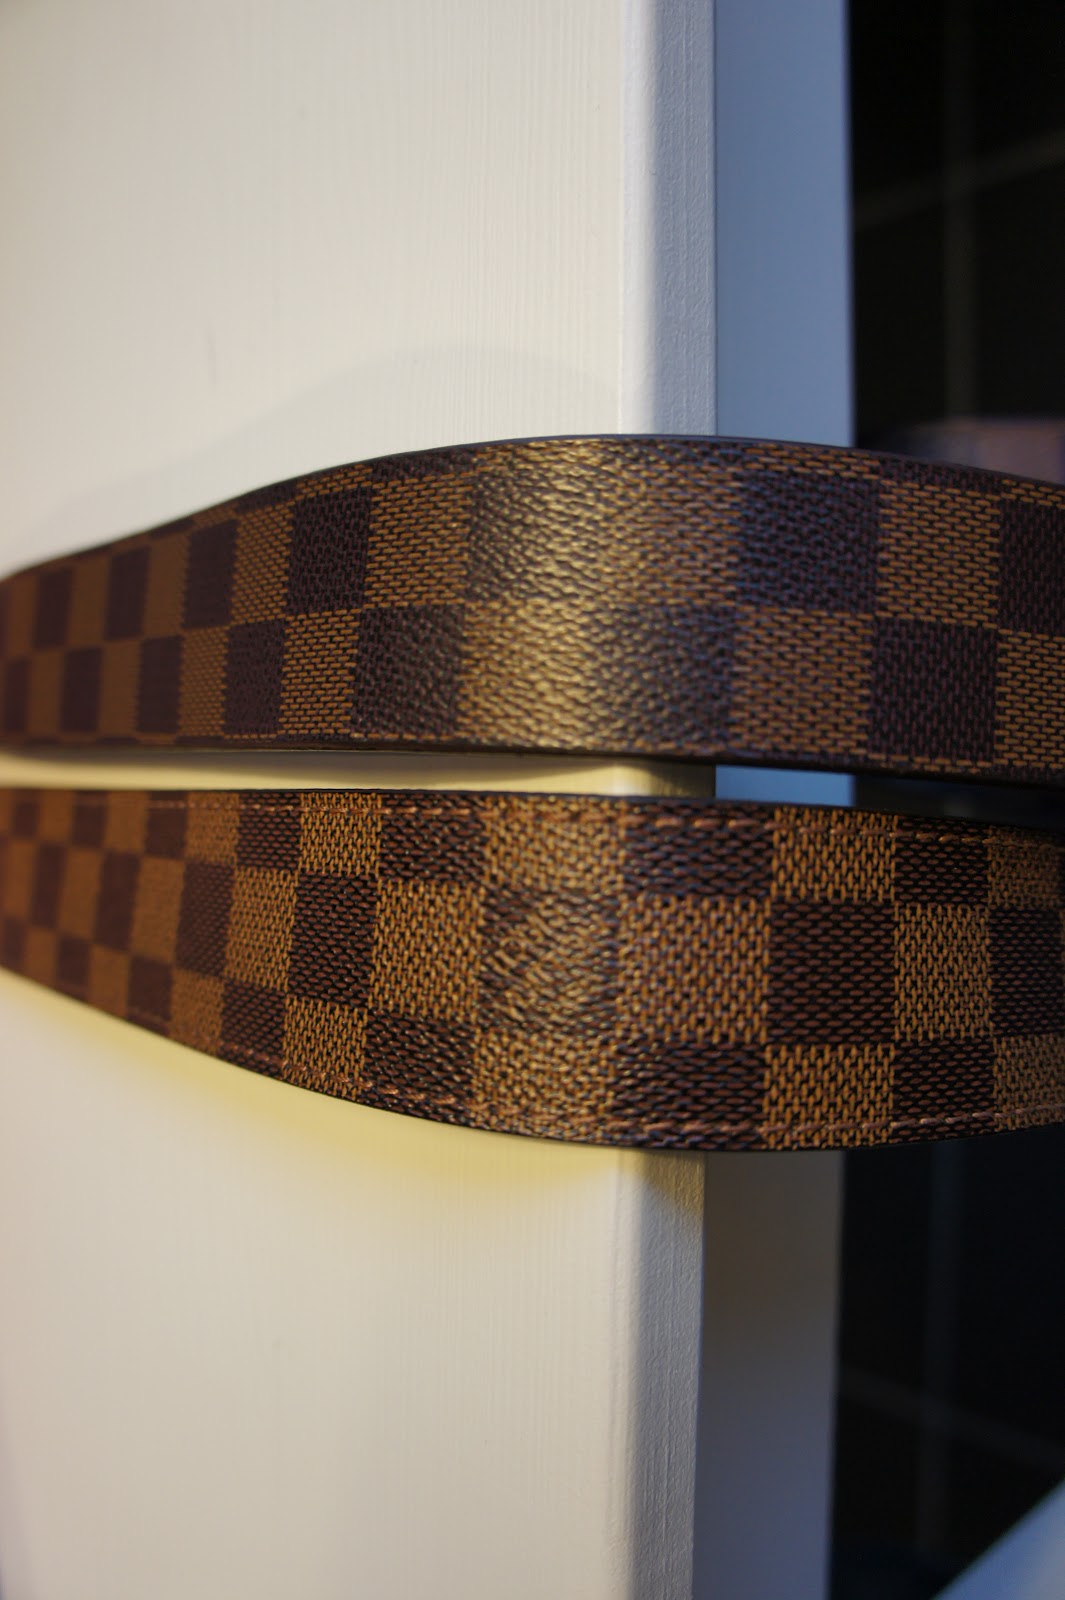 How to Tell if Louis Vuitton Belt is Real [Pictures Real vs Fake